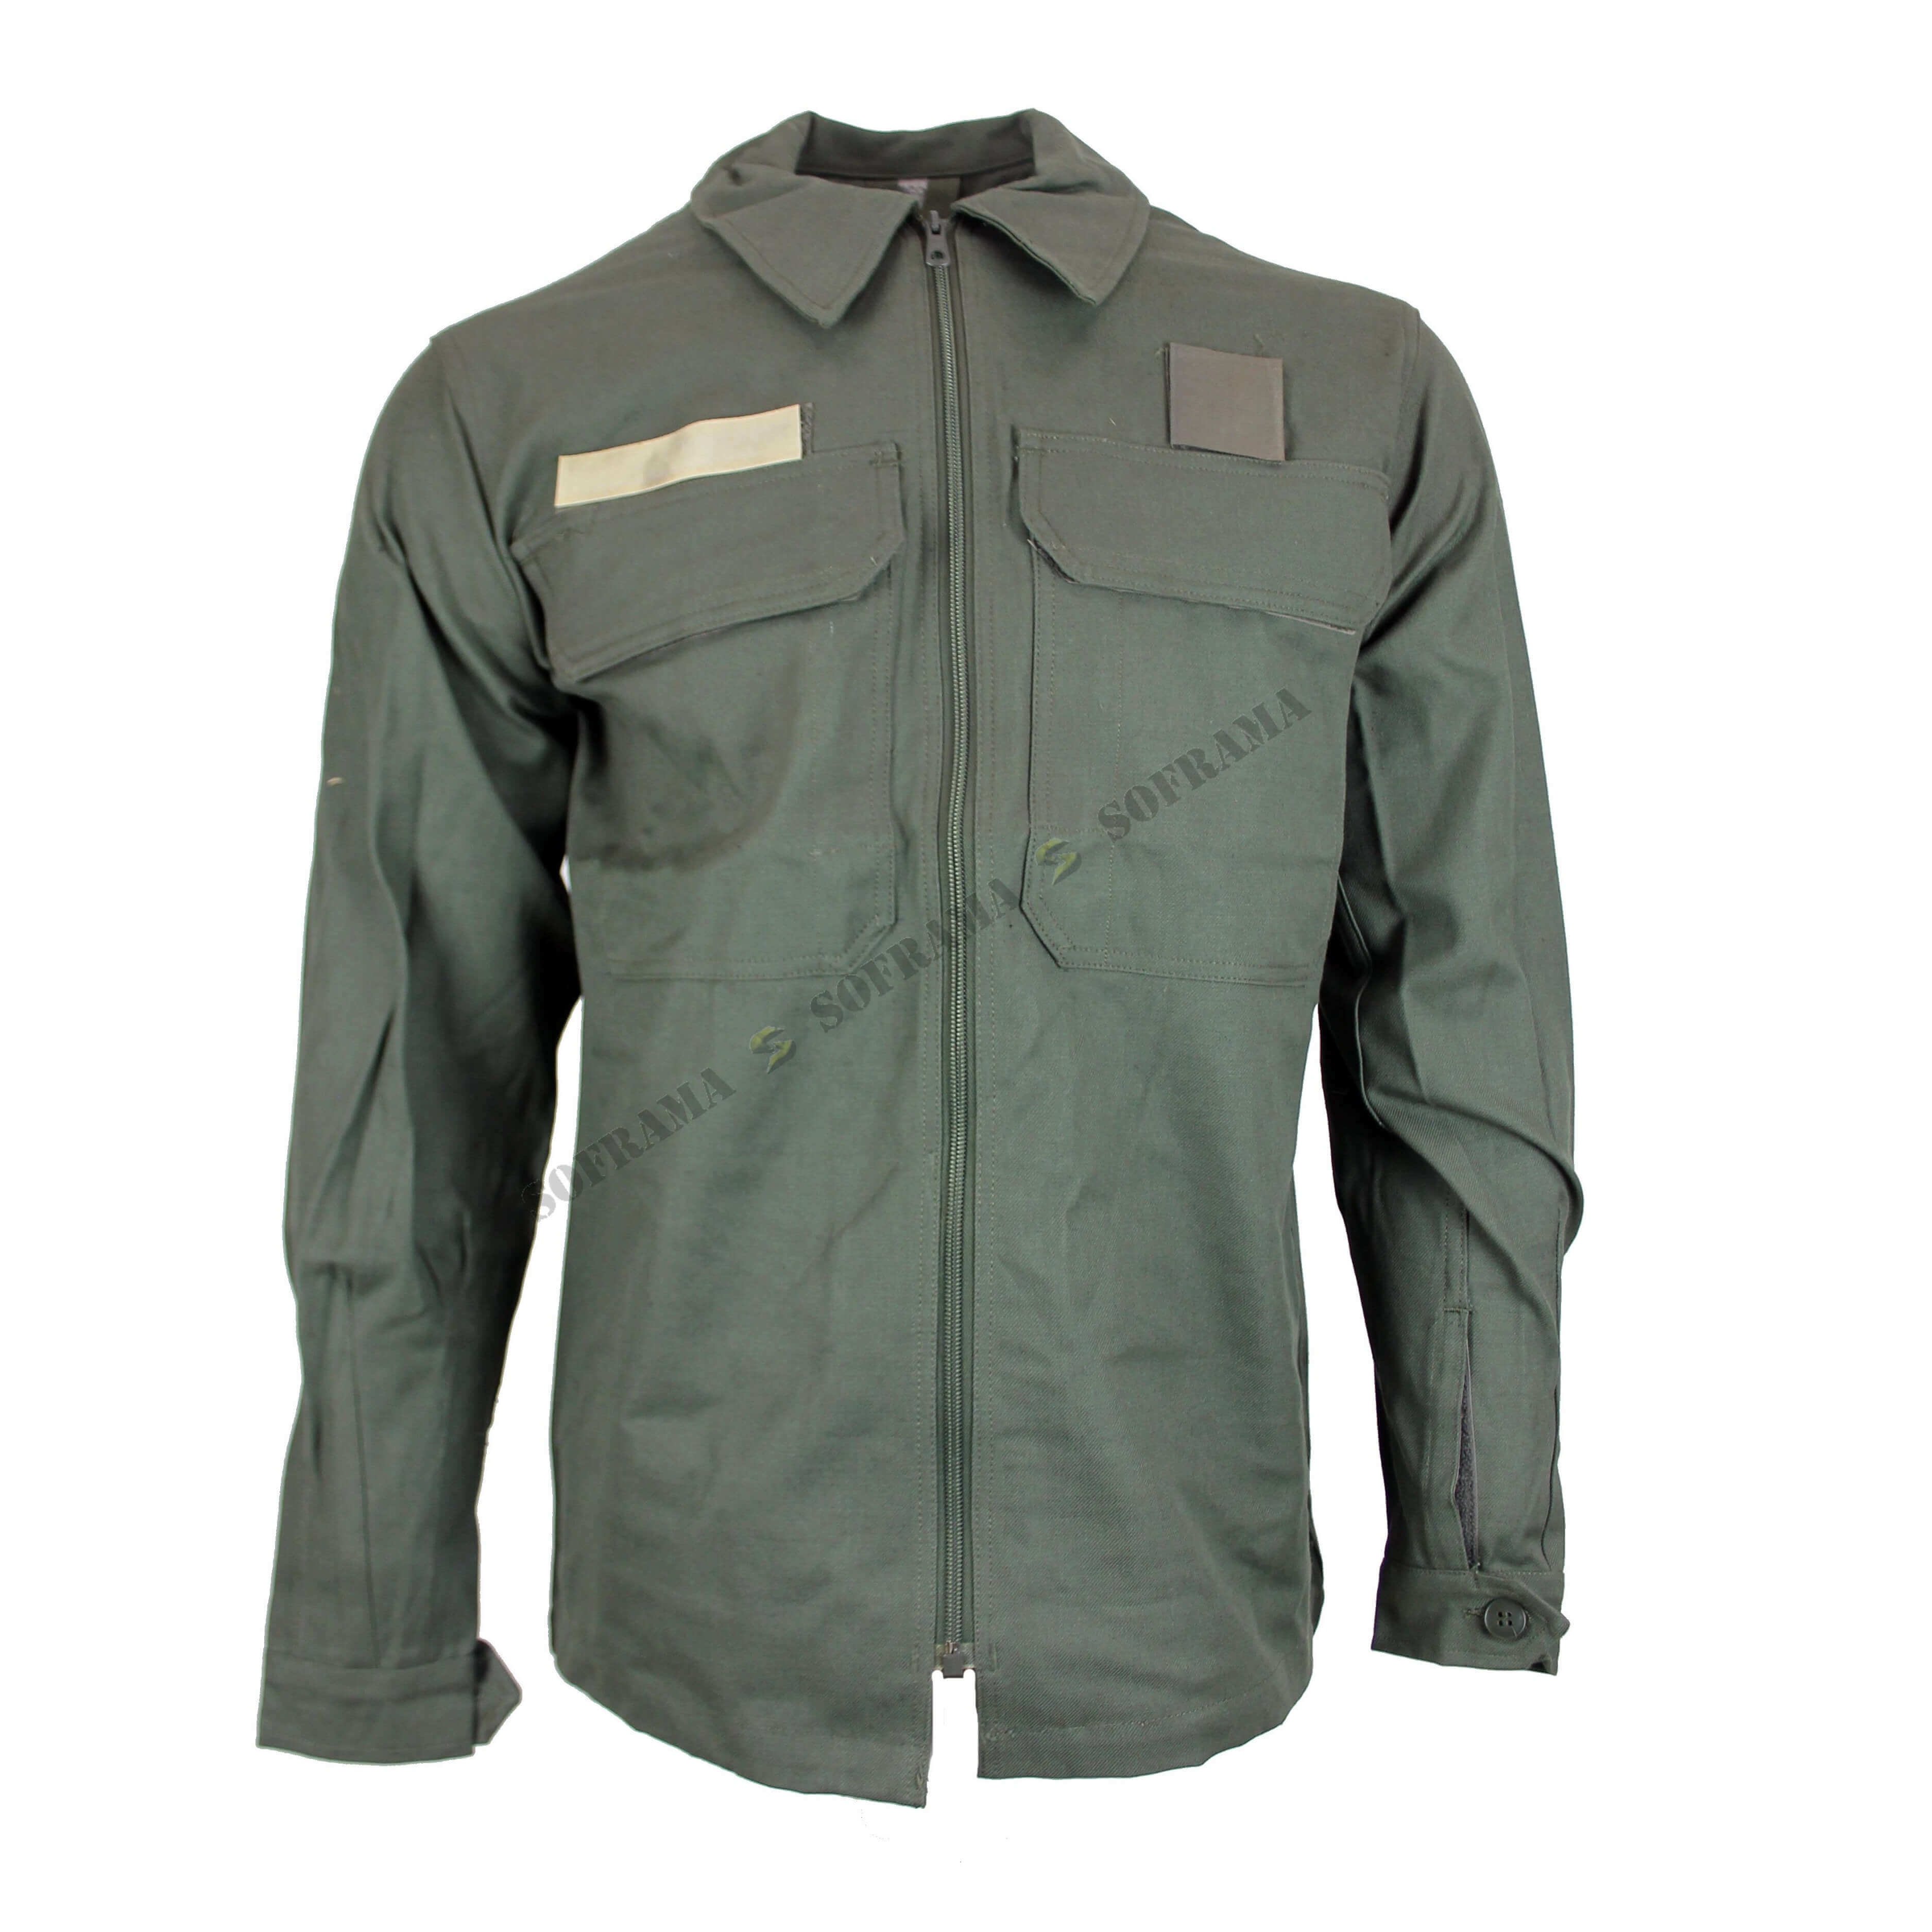 French air force work jacket - Soframa